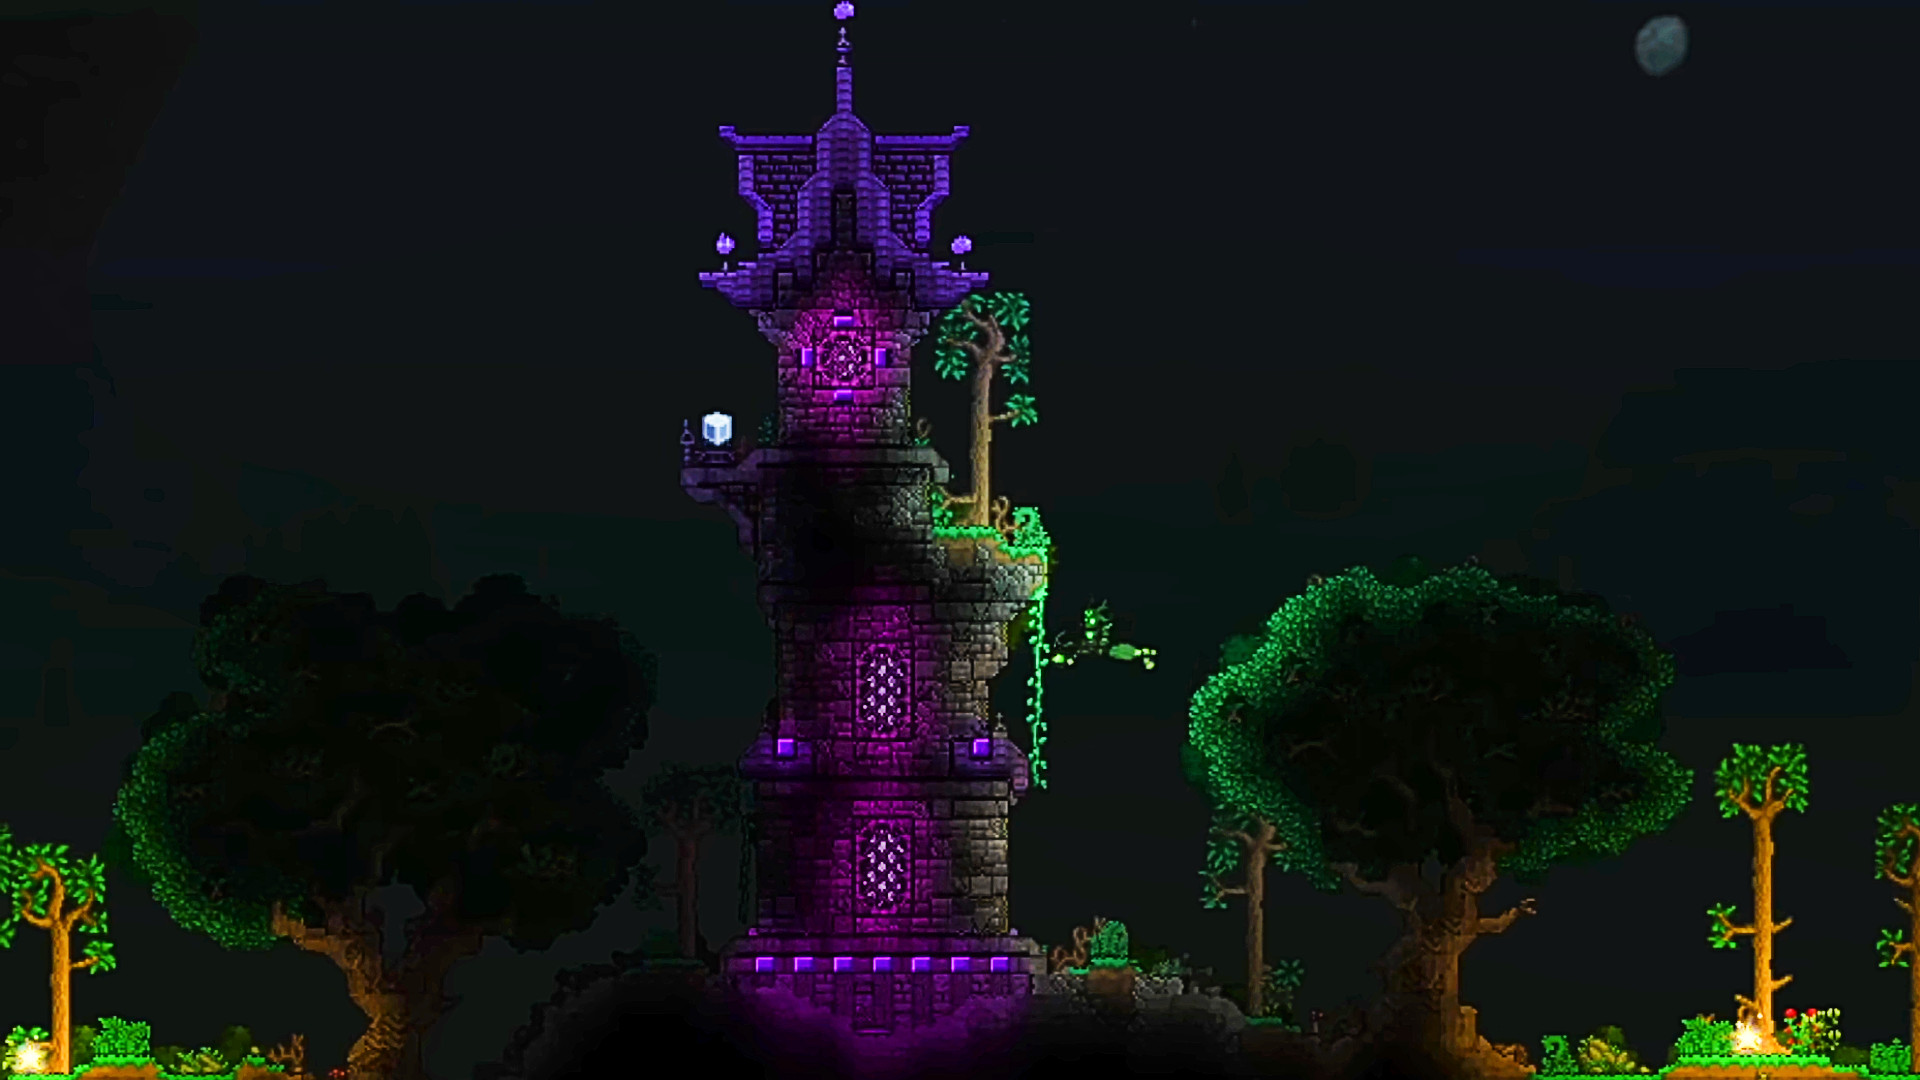 Terraria 1.4.4 update coatings open a world of possibilities